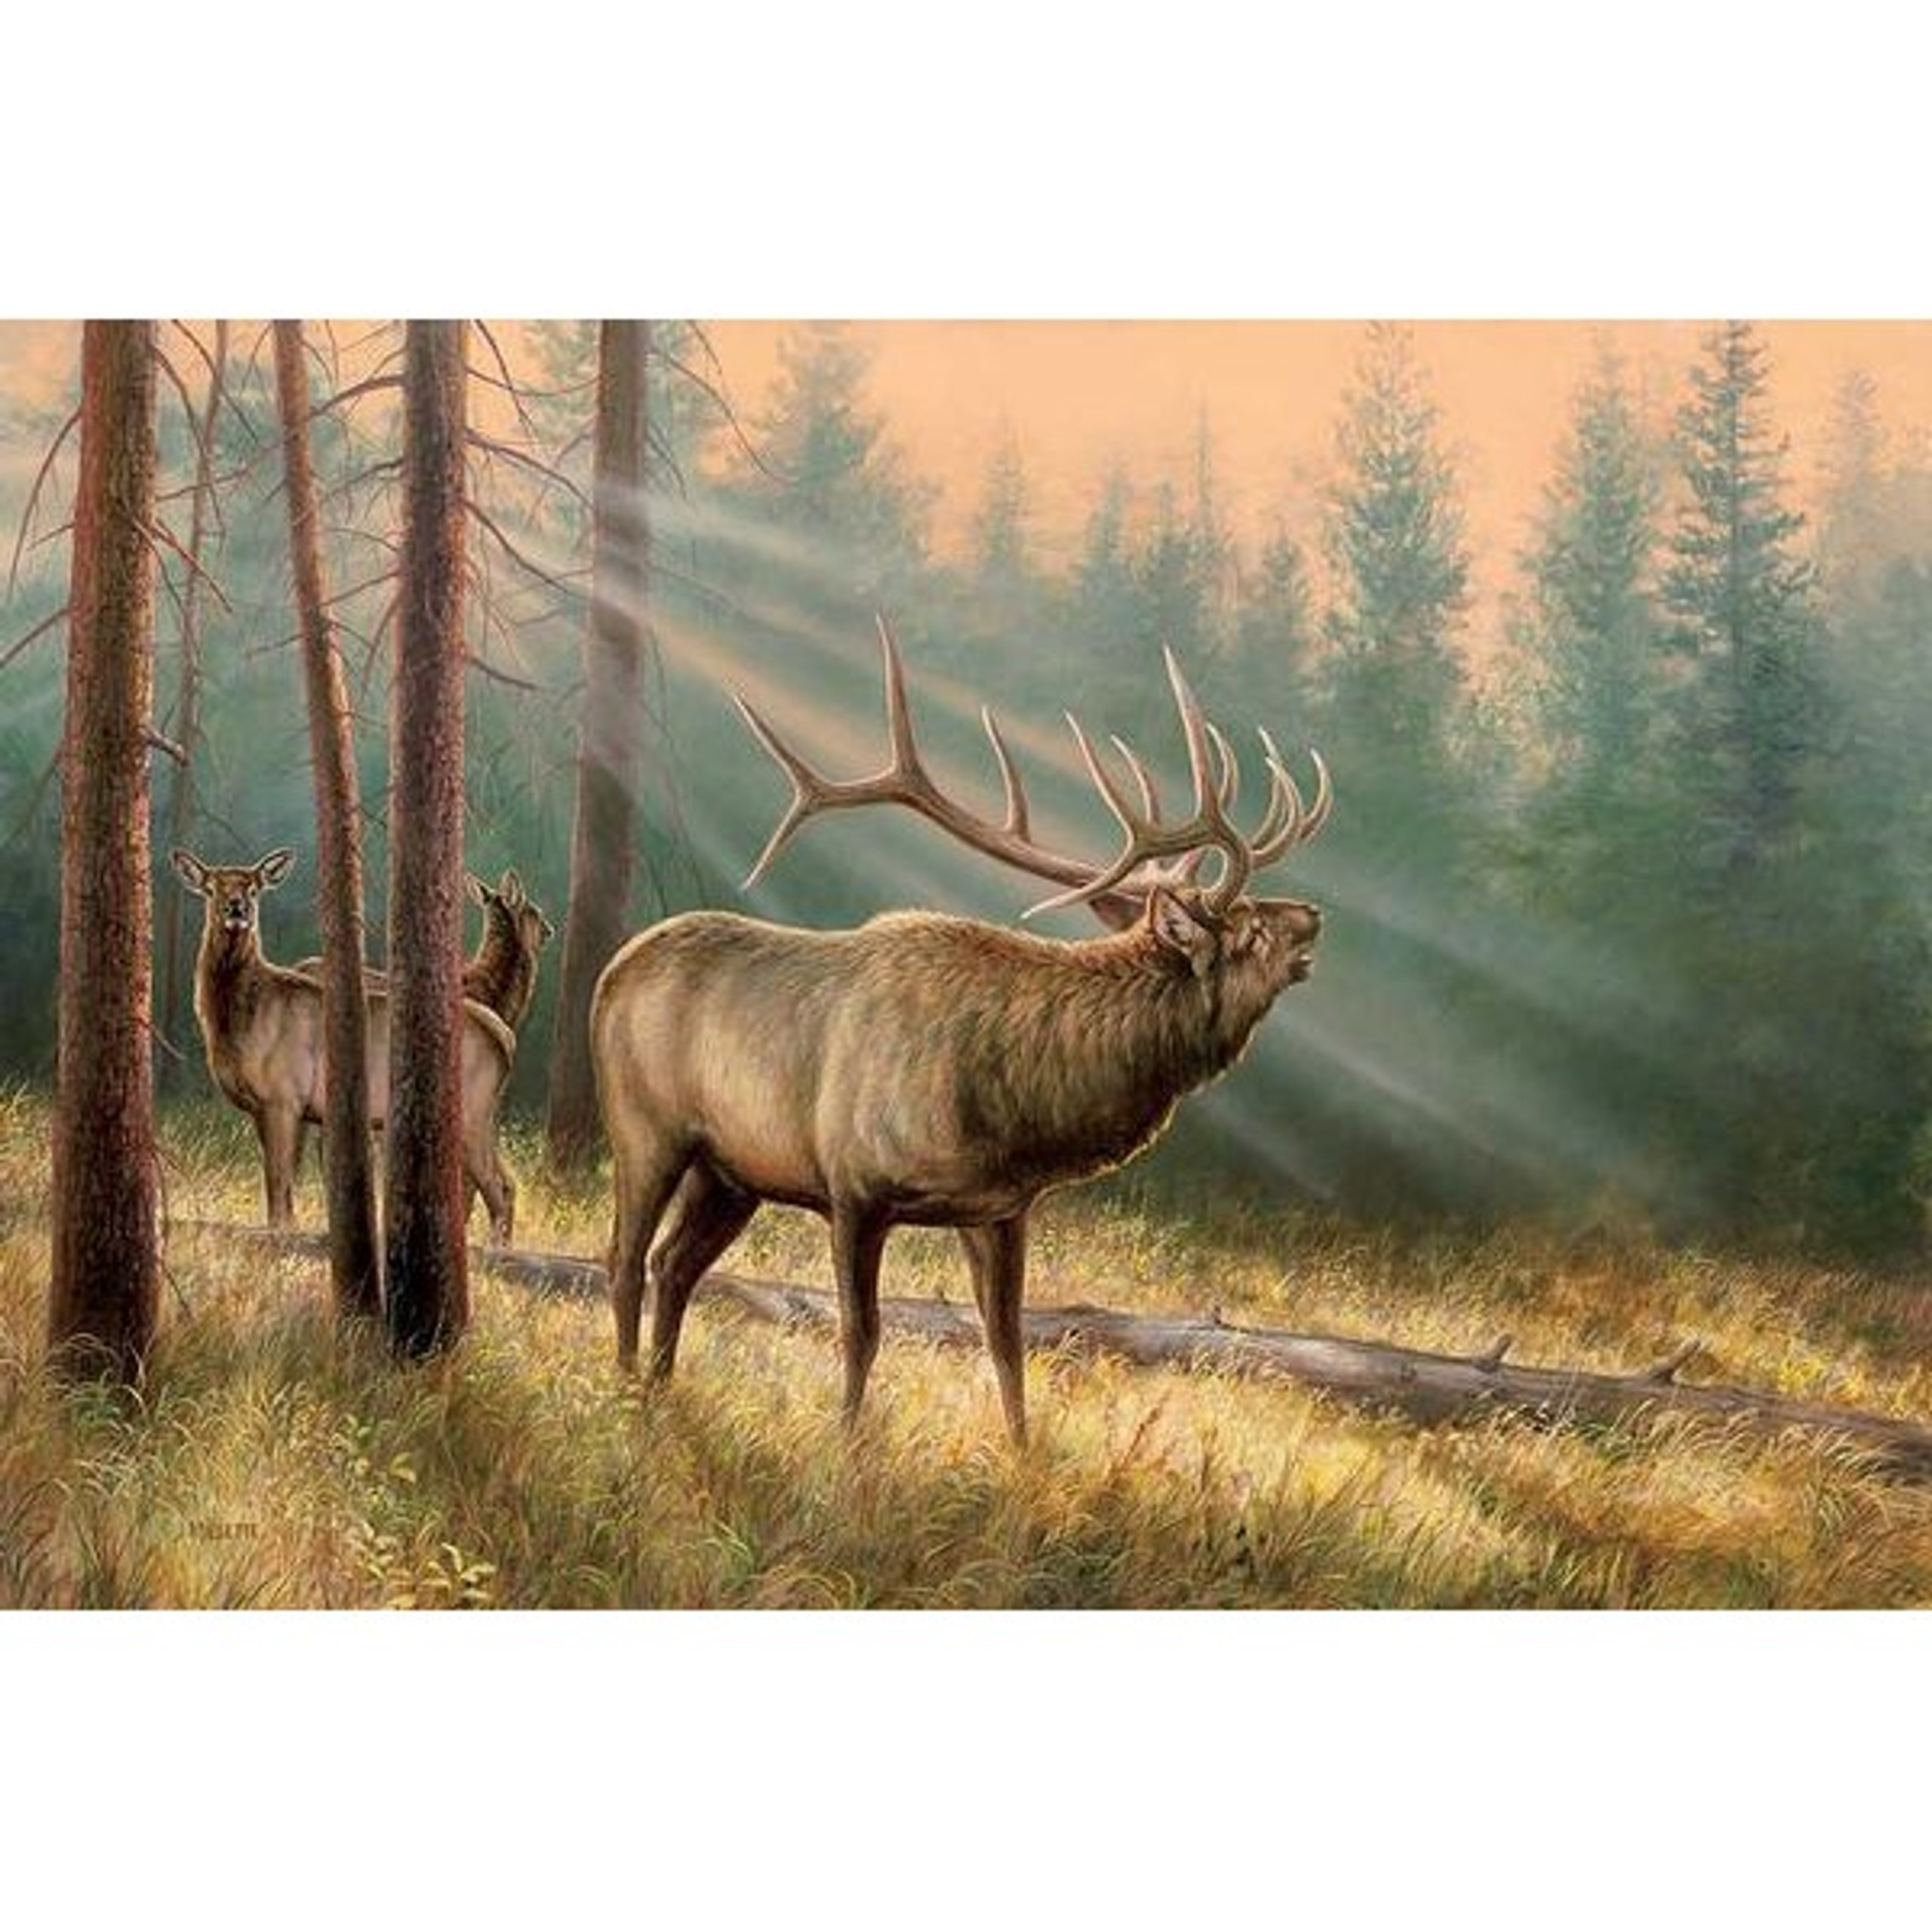 Answering the Call Elk Original Acrylic Painting by Rosemary Millette ...